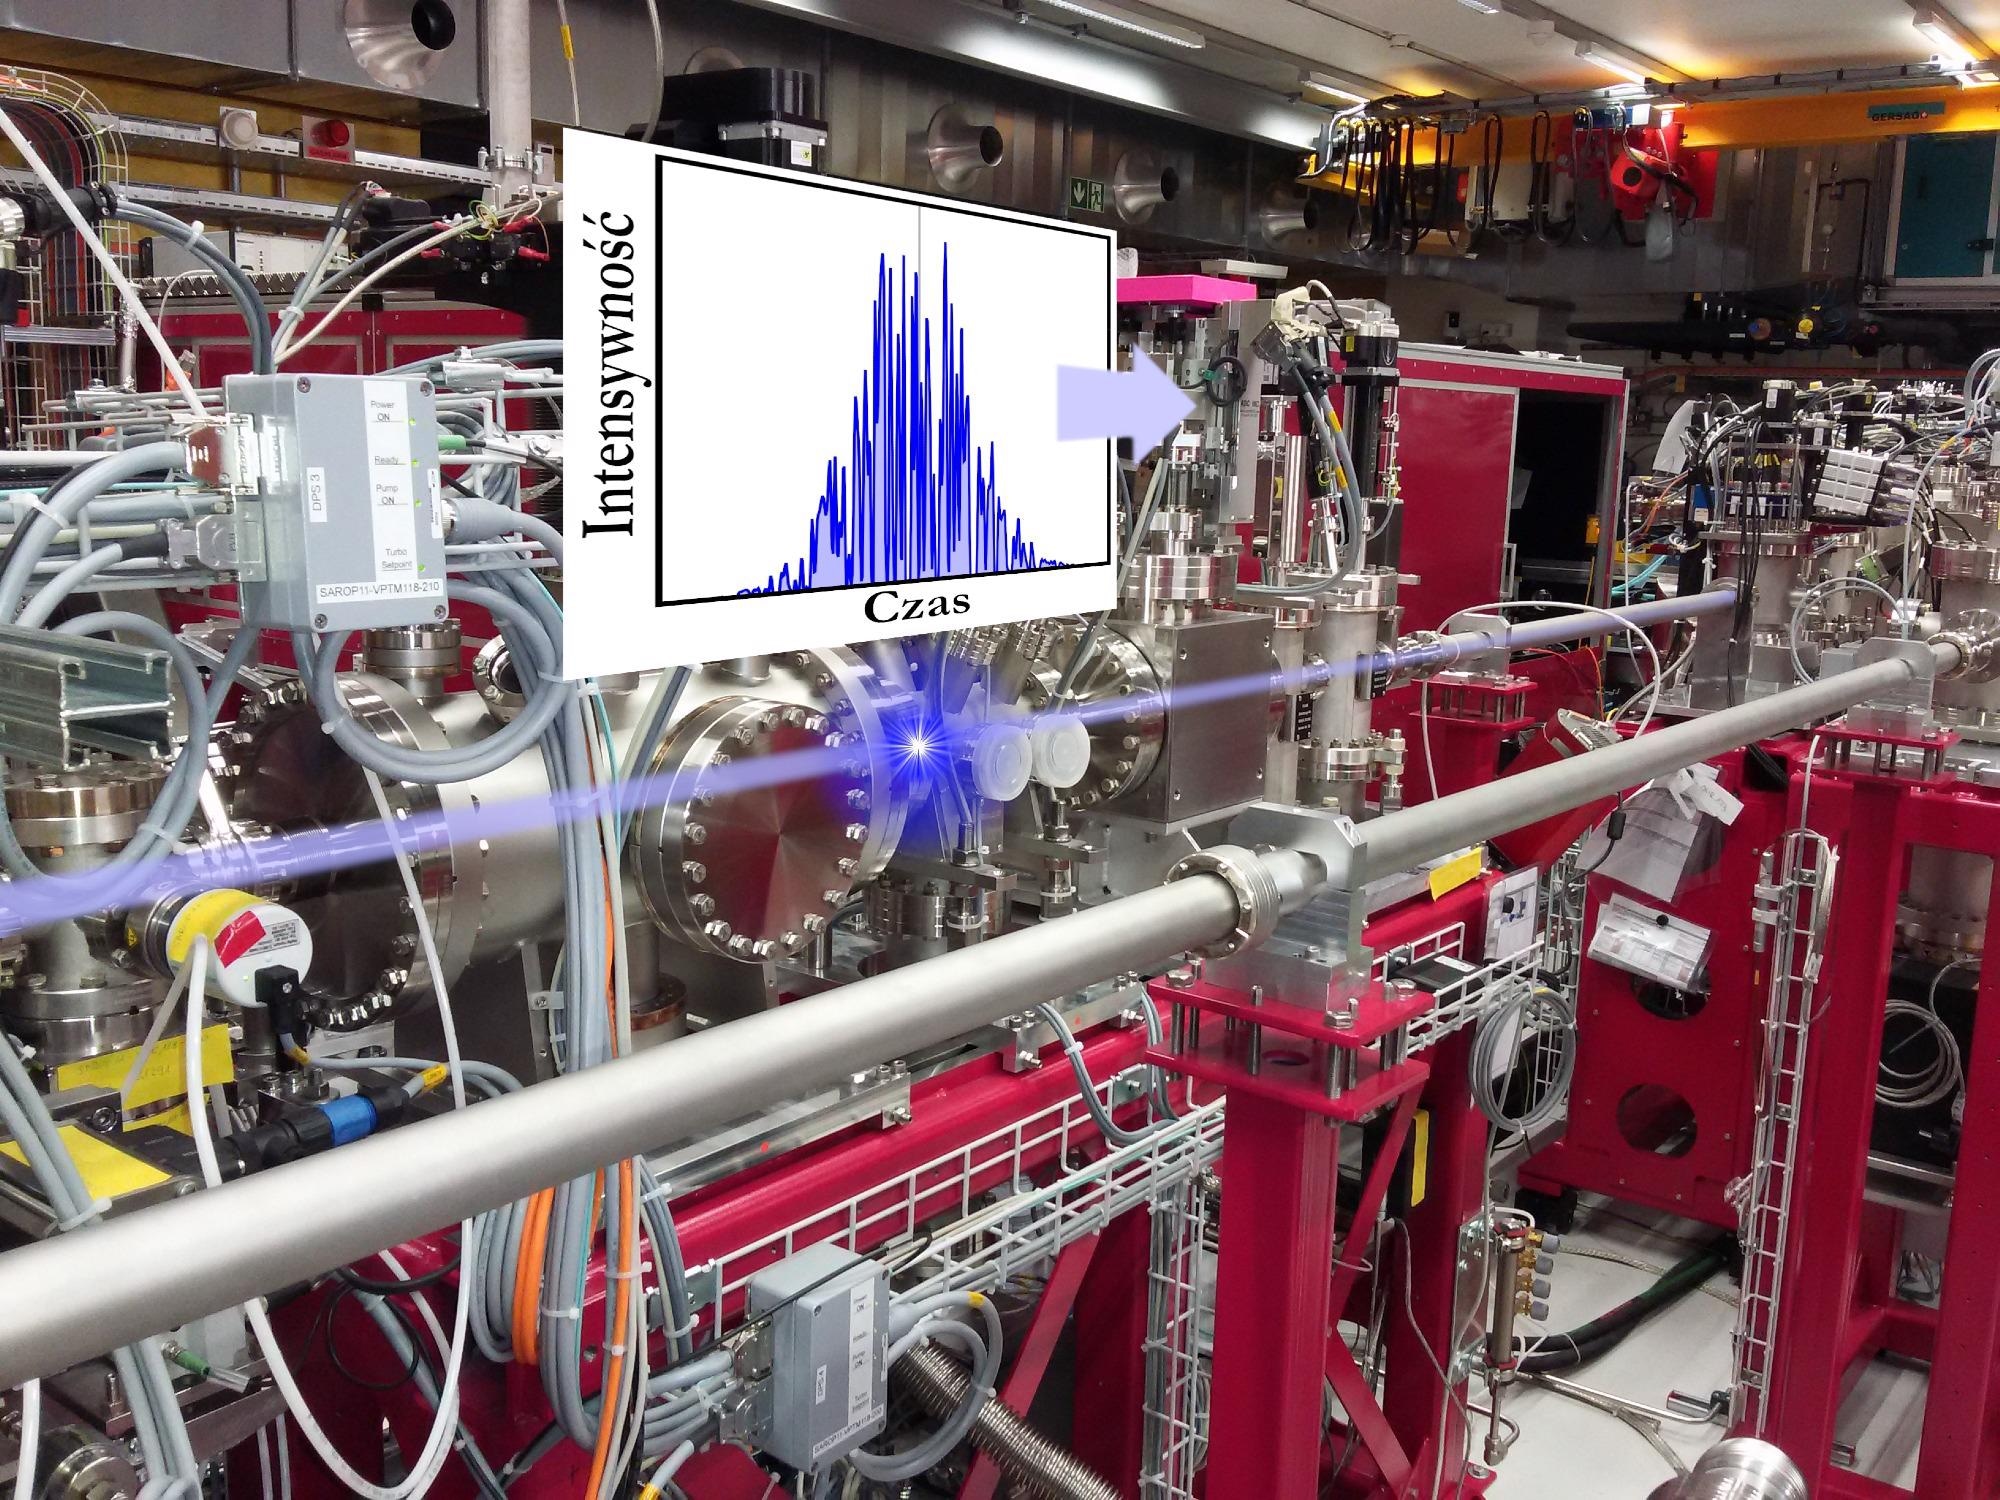 Scientists Develop New Method to Measure Chemical Reactions Within Attoseconds.